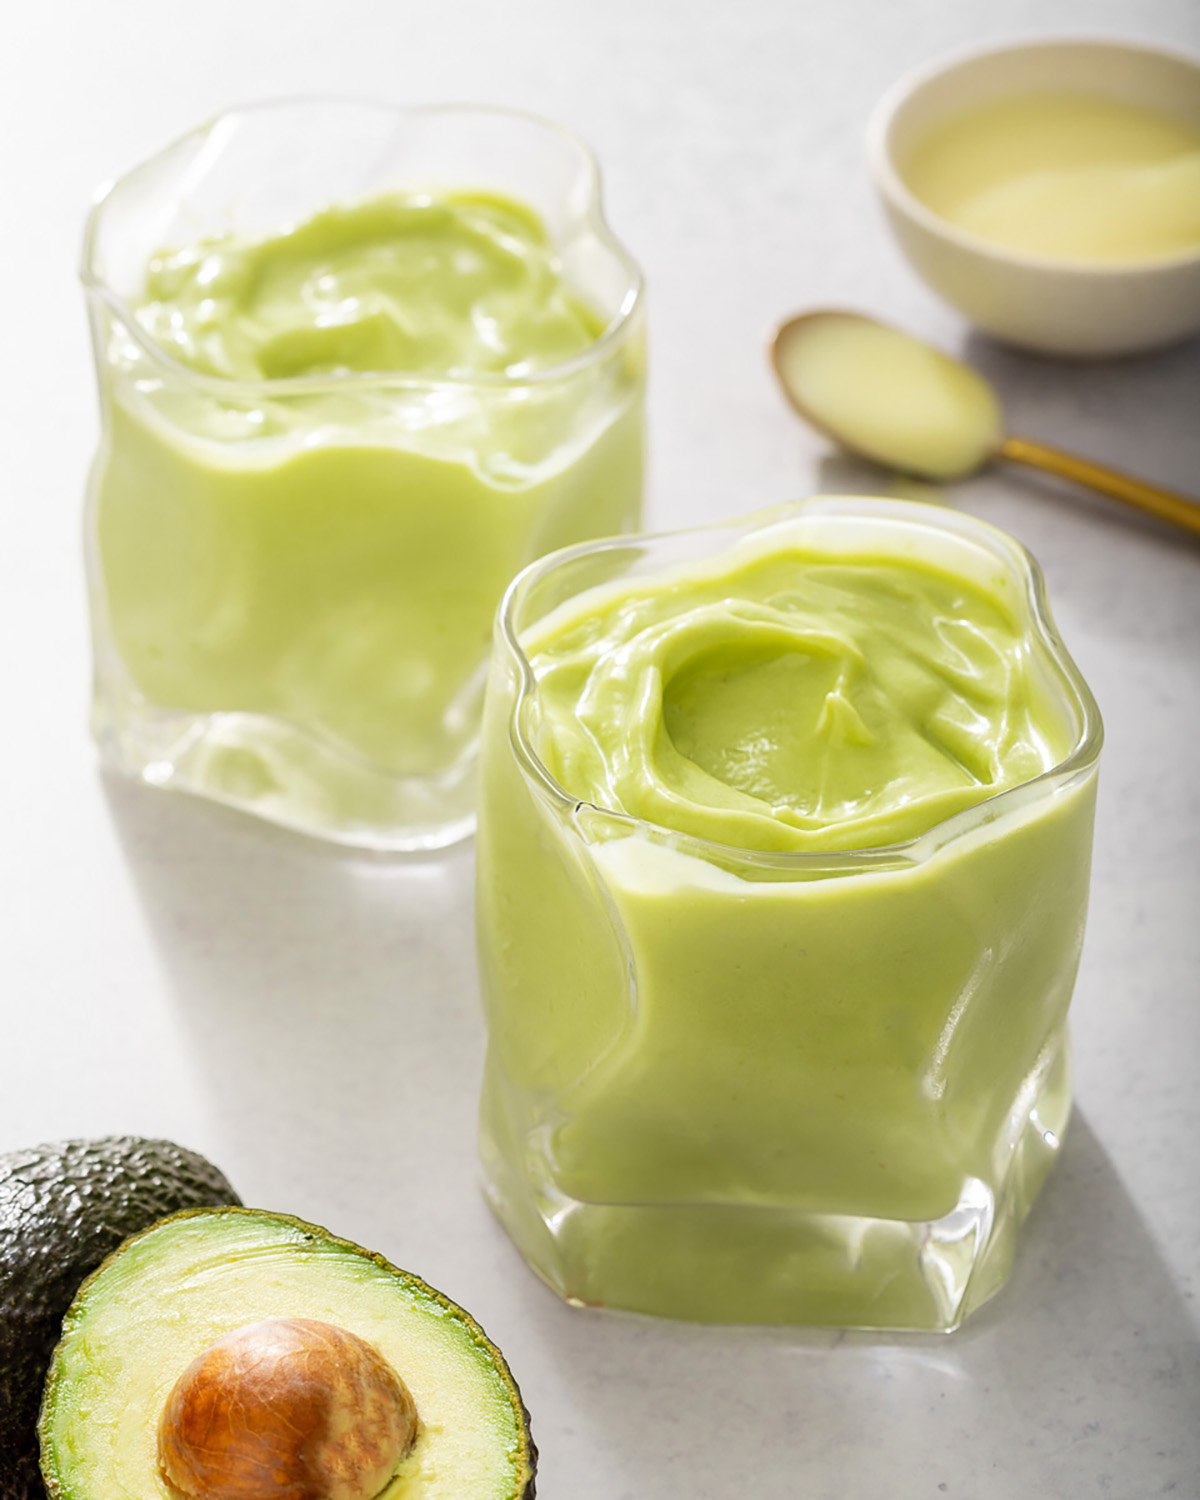 Two glasses with avocado smoothie prepared.